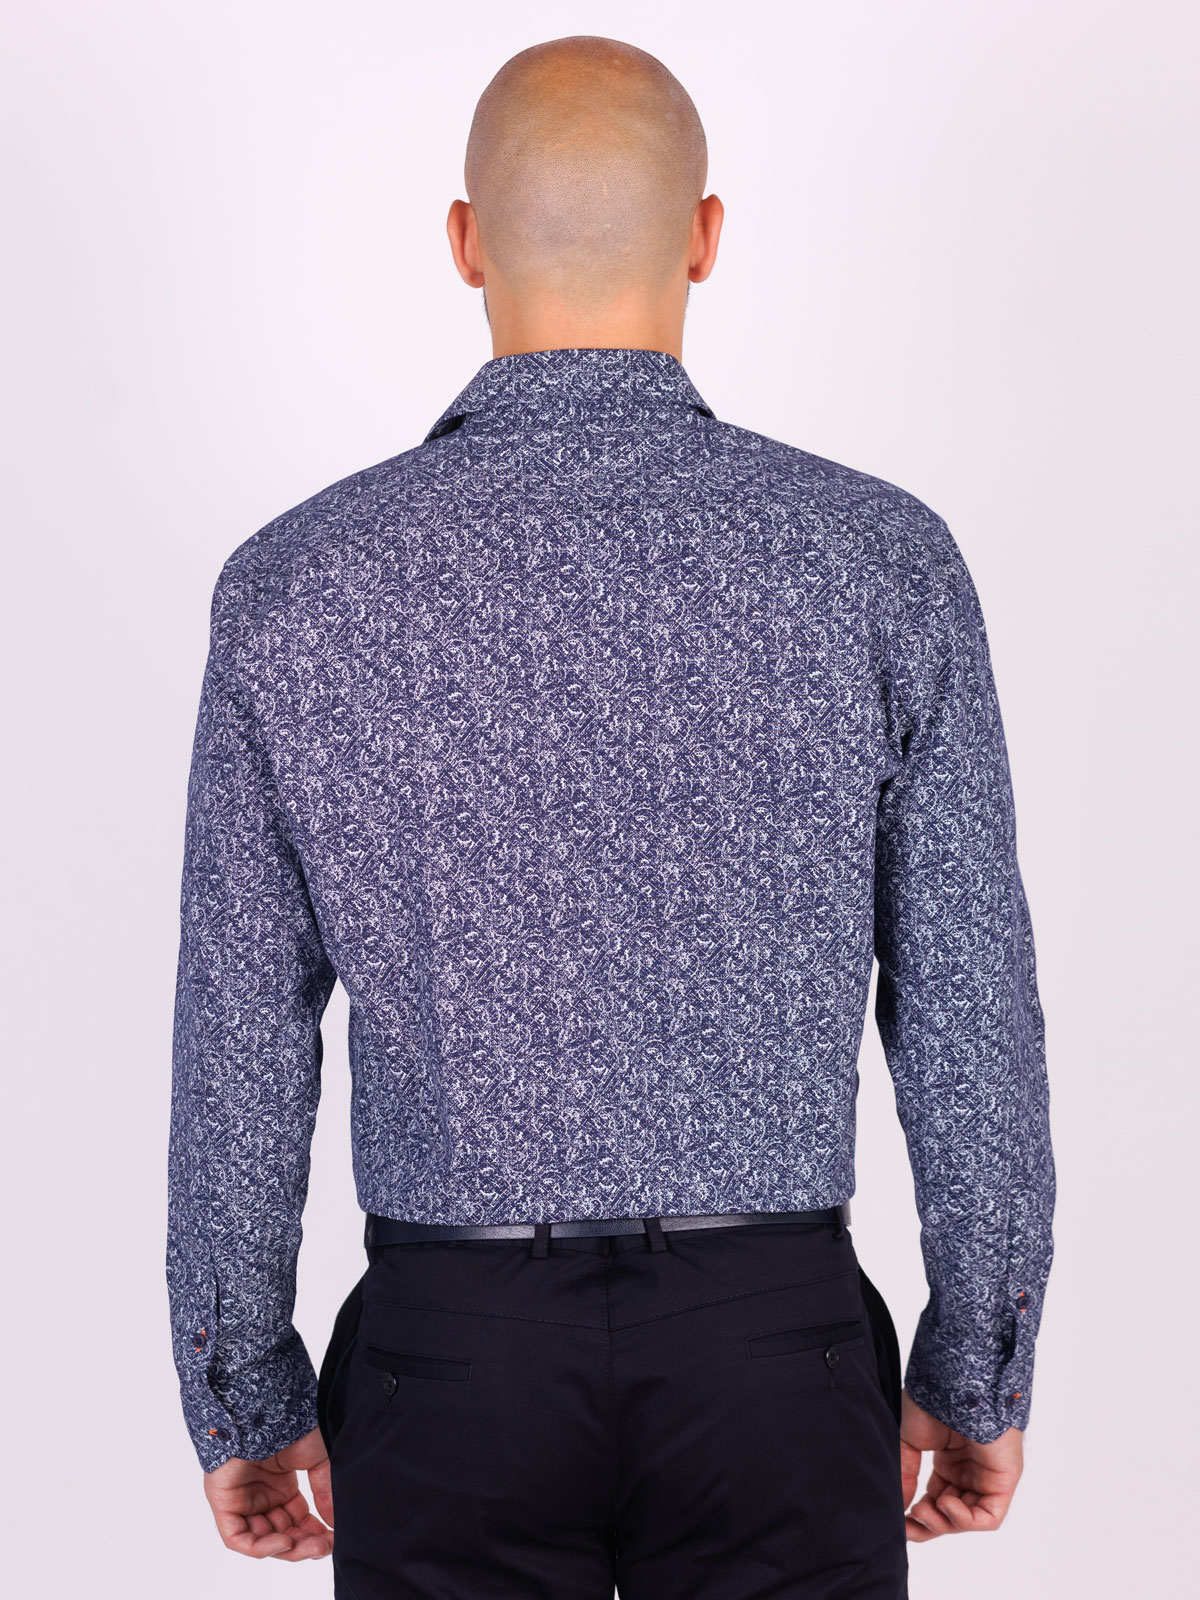 Shirt in dark blue with max figures - 21569 € 44.43 img2